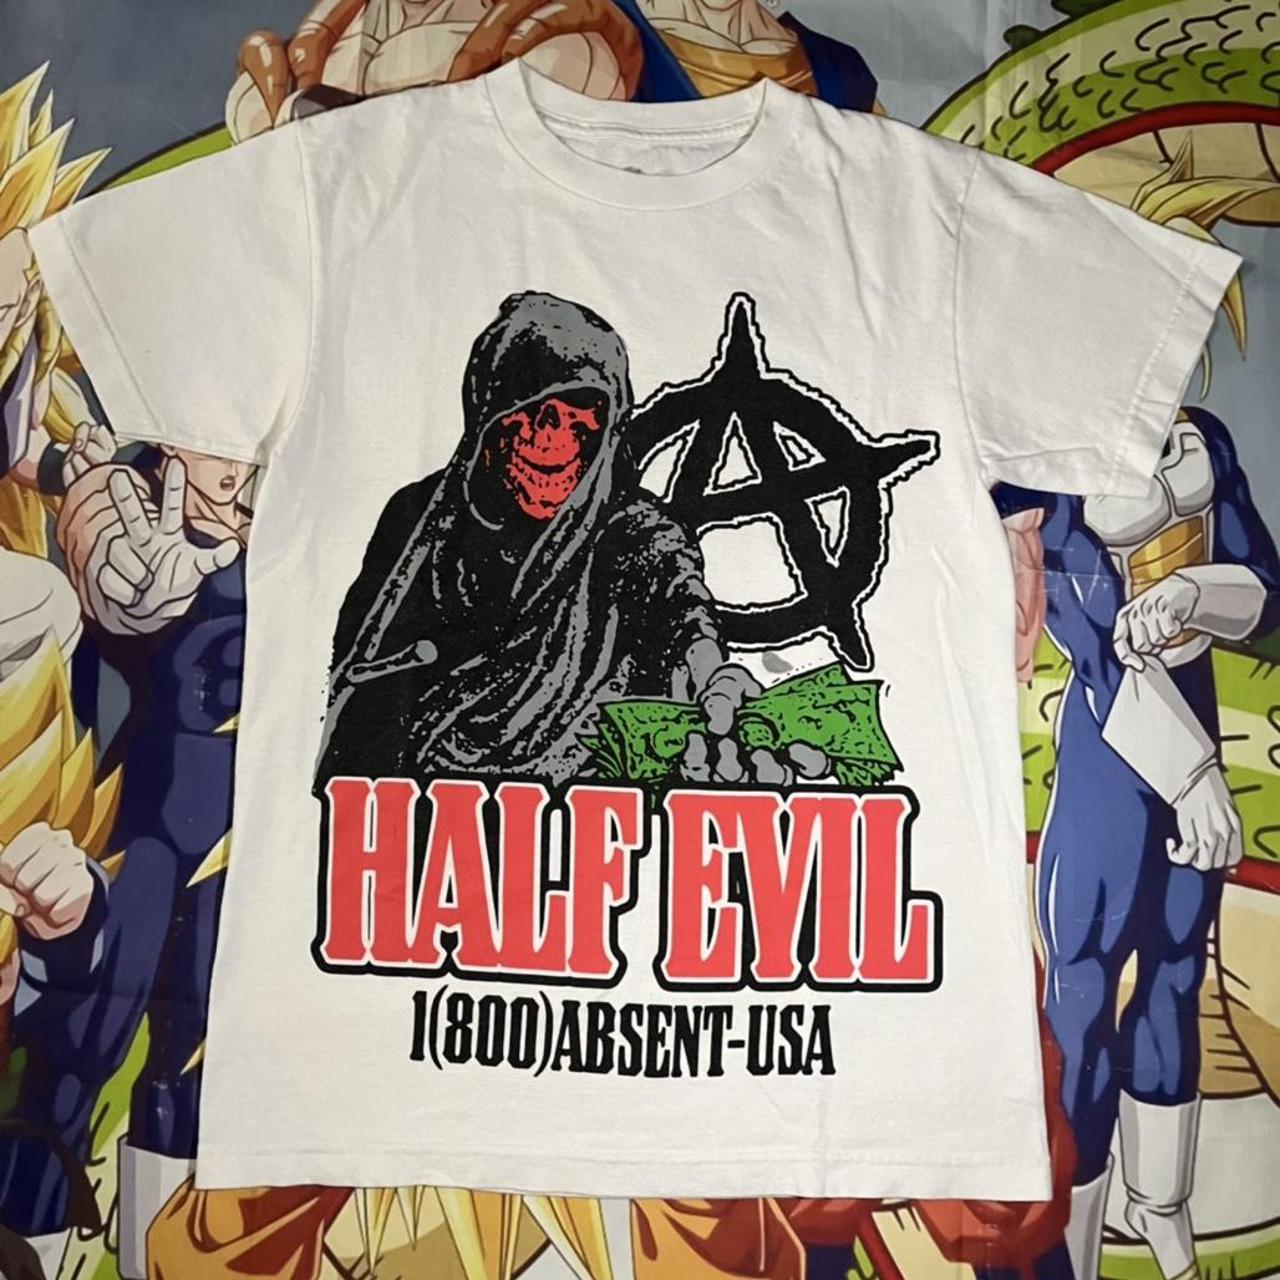 Product Image 1 - half evil x absent 1